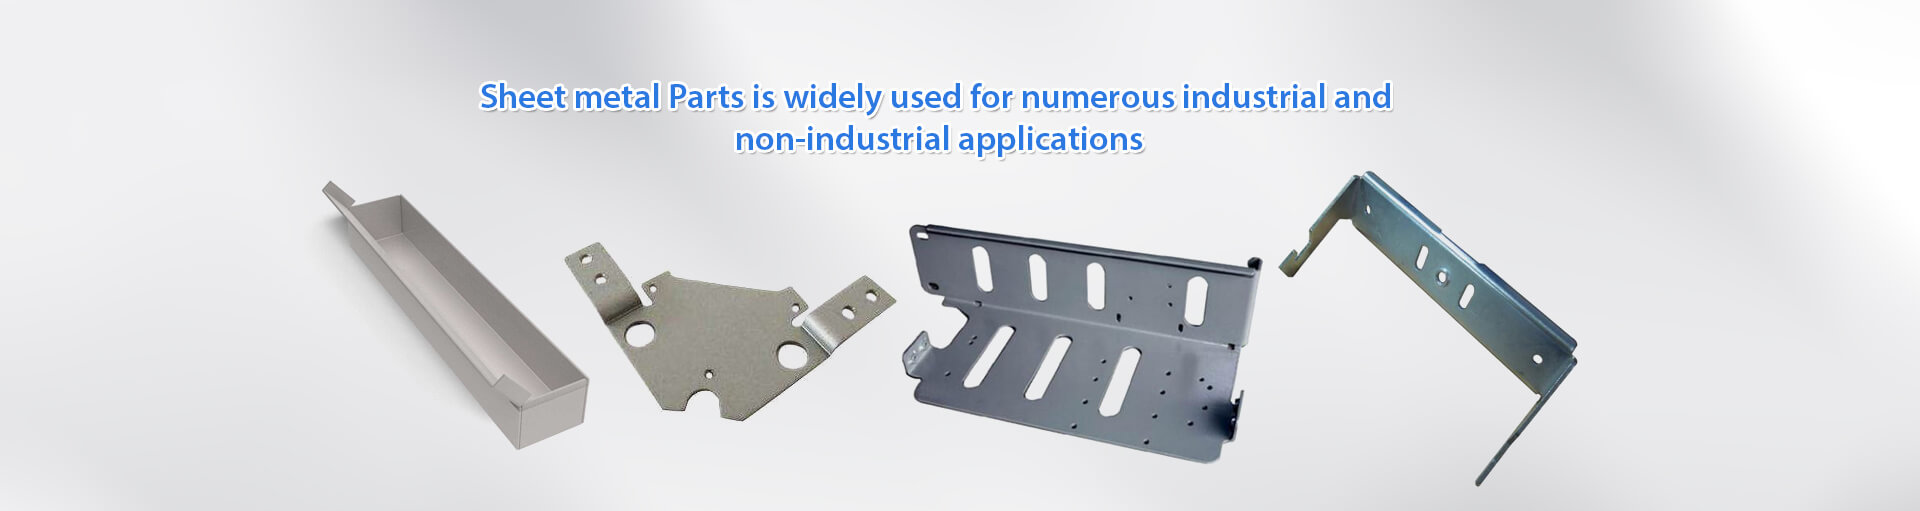 small and medium size stamping parts and metal sheet fabrication